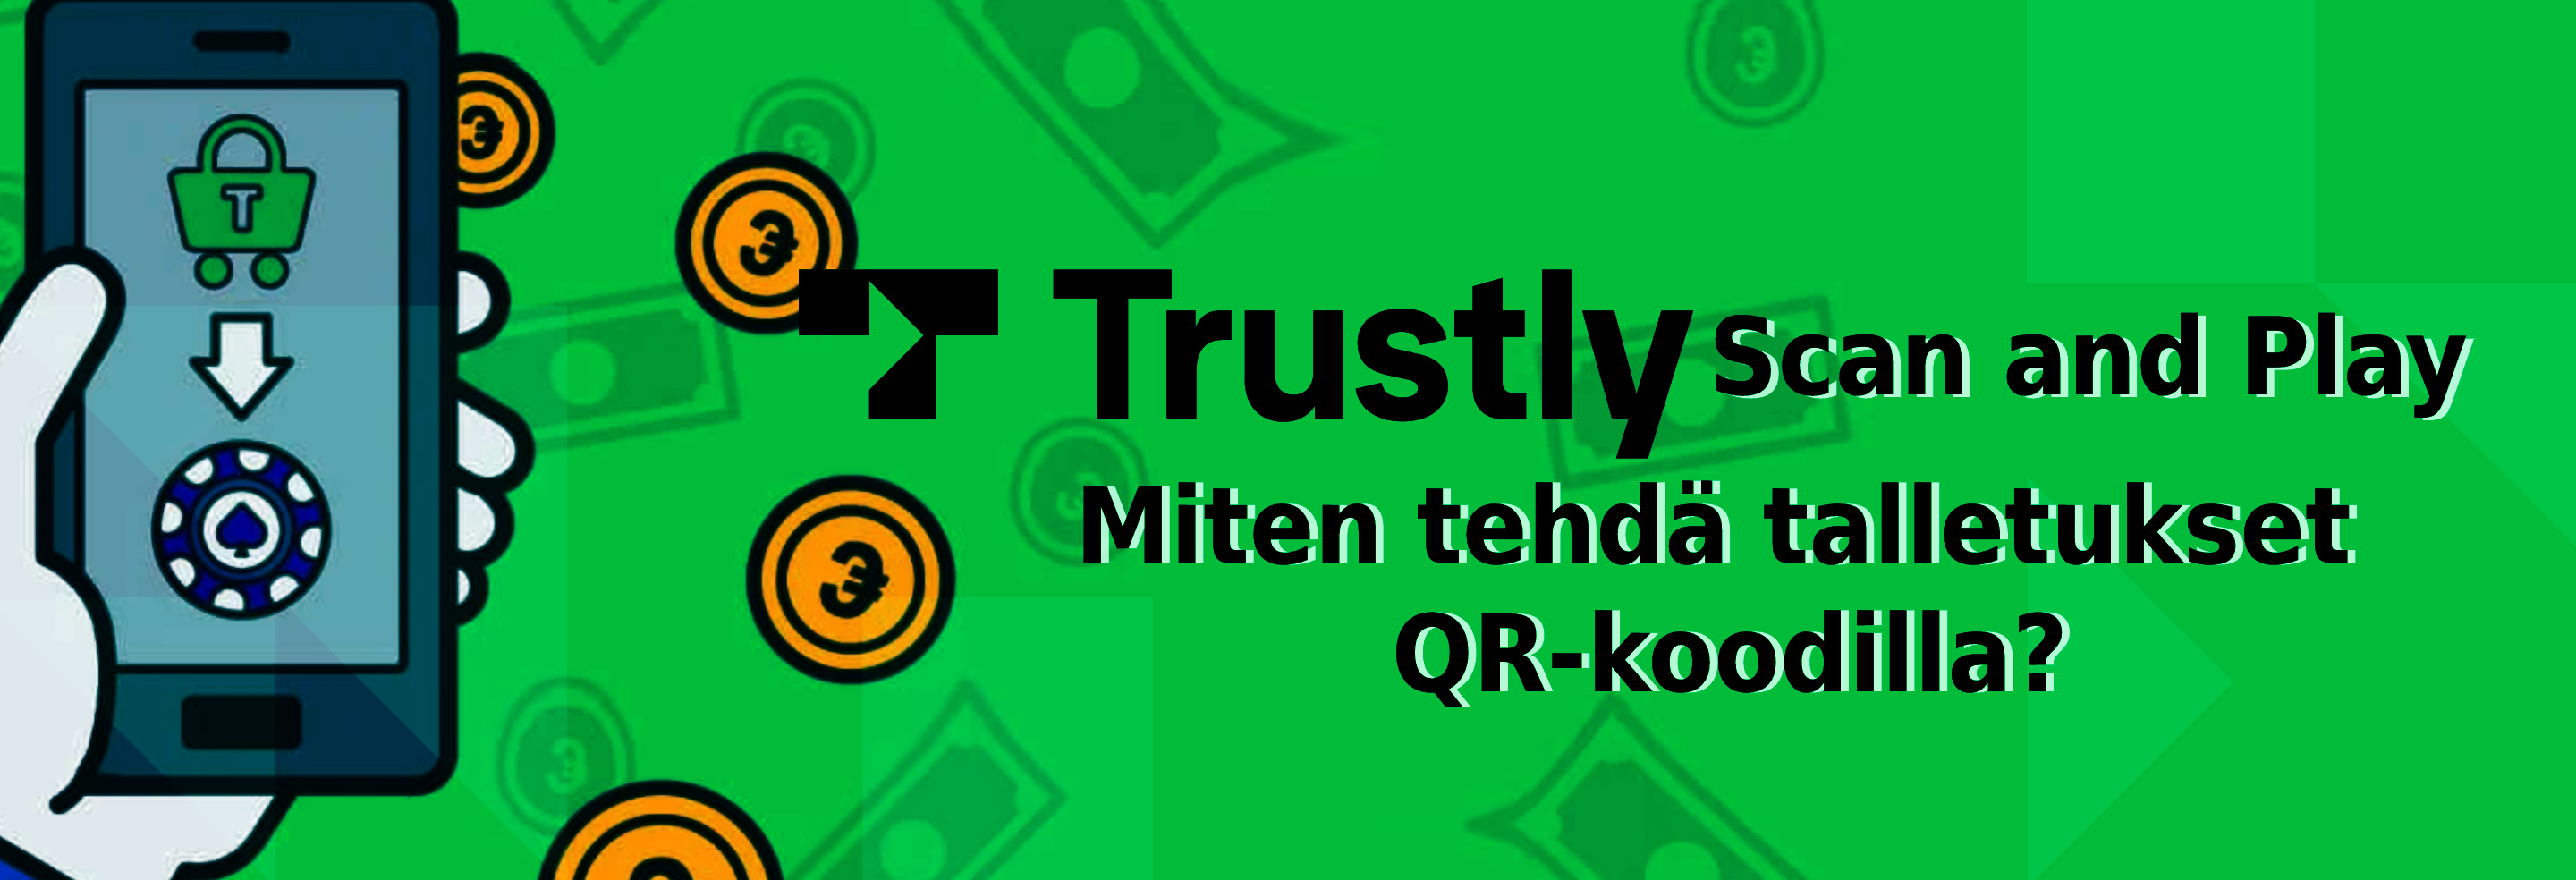 Trustly Scan and Play